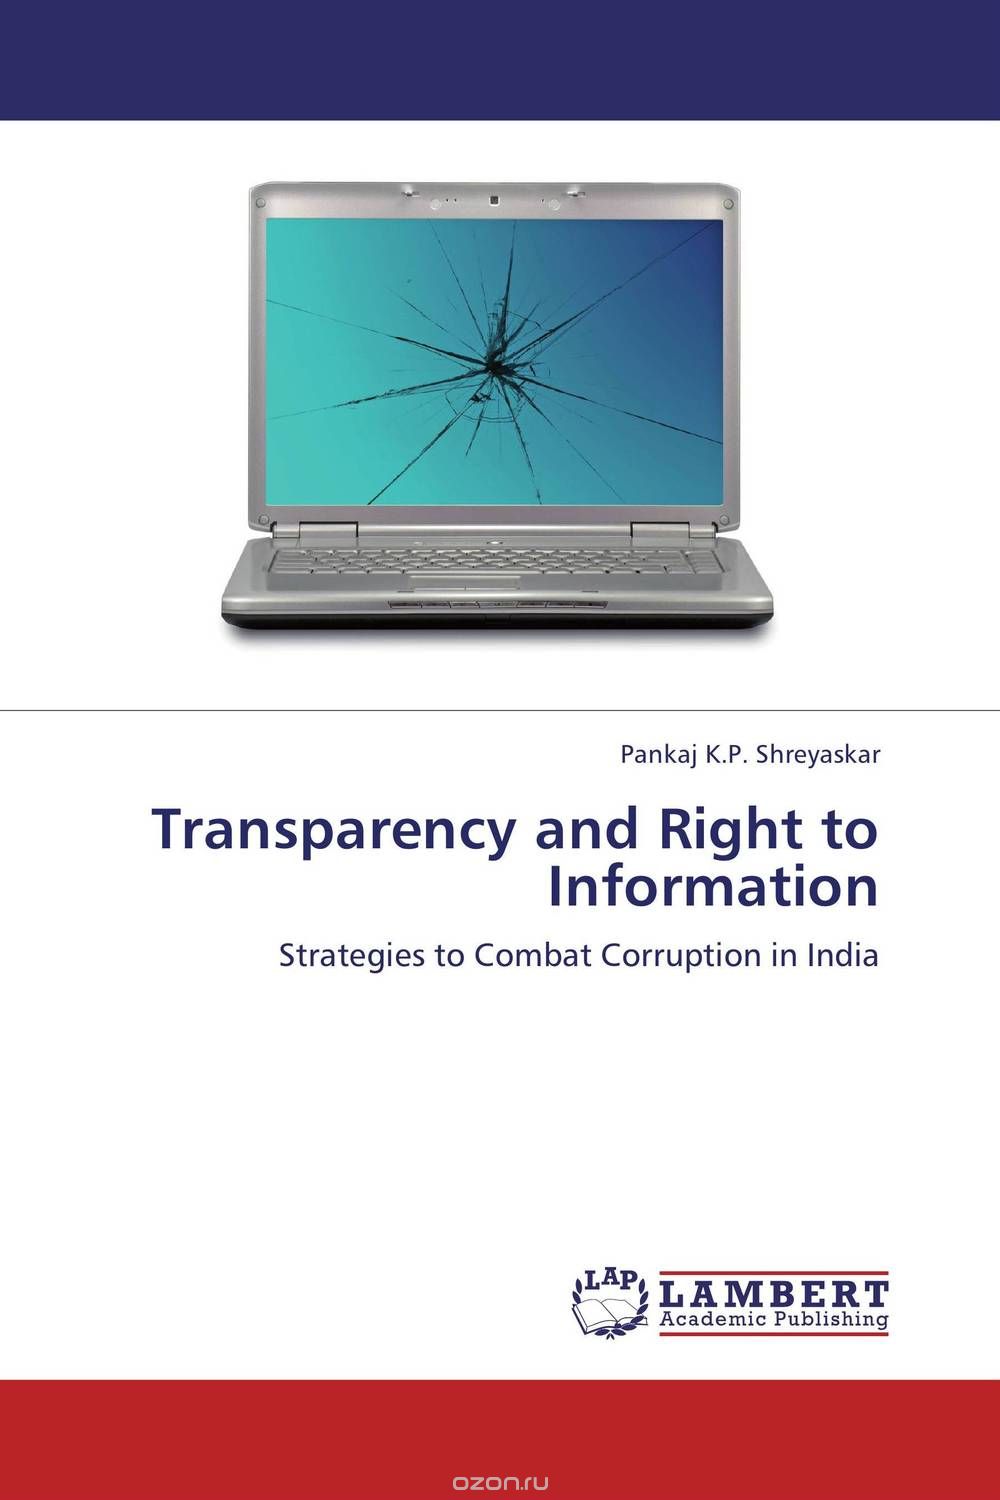 Скачать книгу "Transparency and Right to Information"